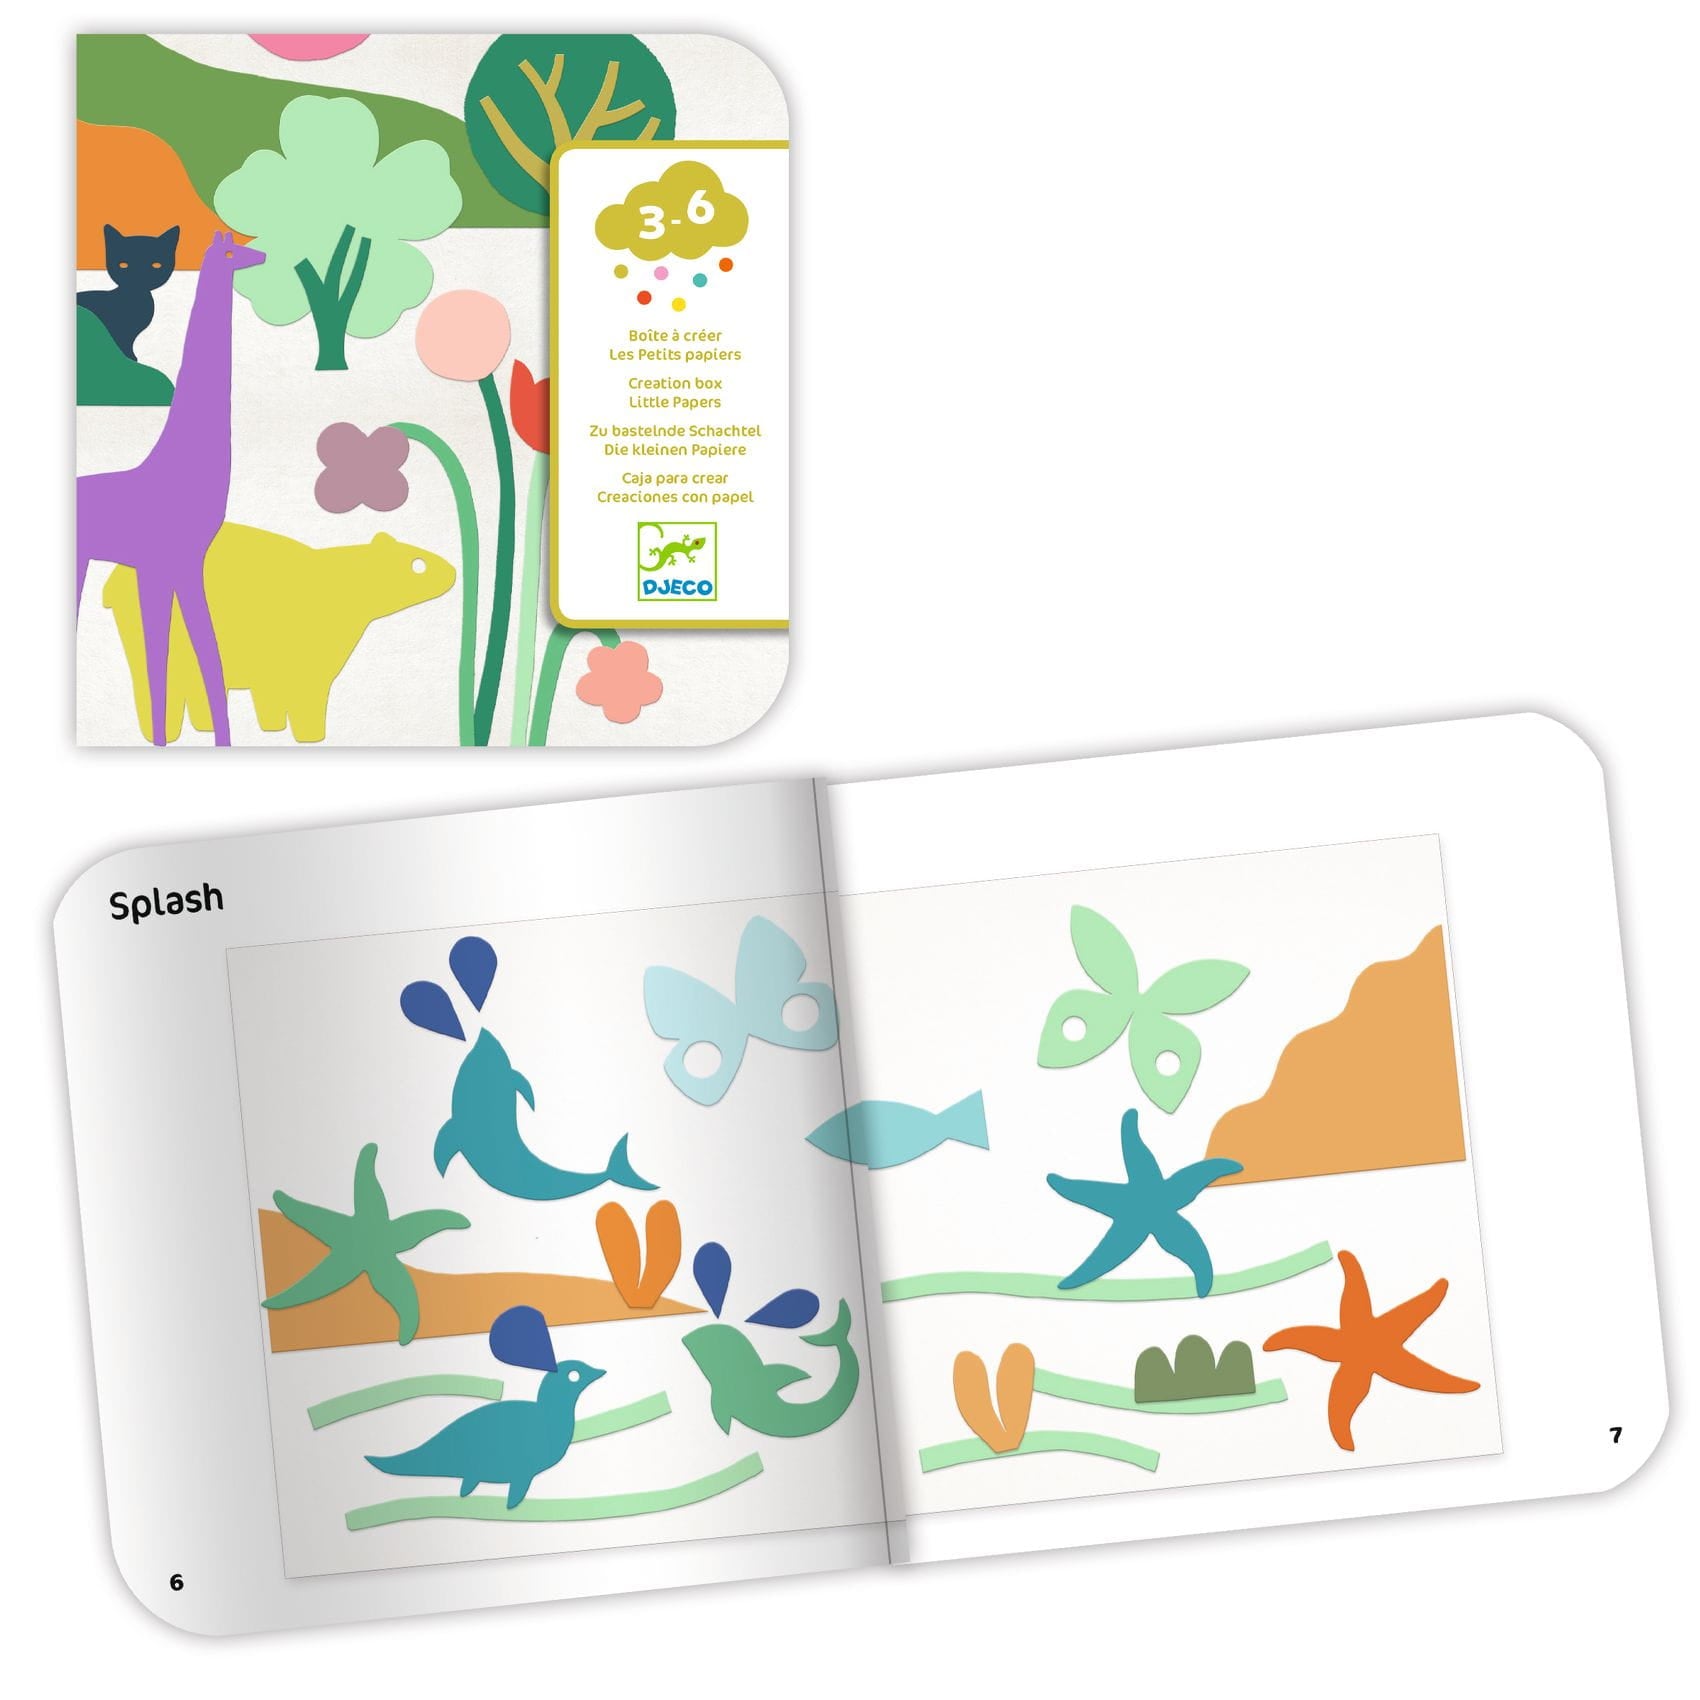 Djeco: Creative set for toddlers, landscapes